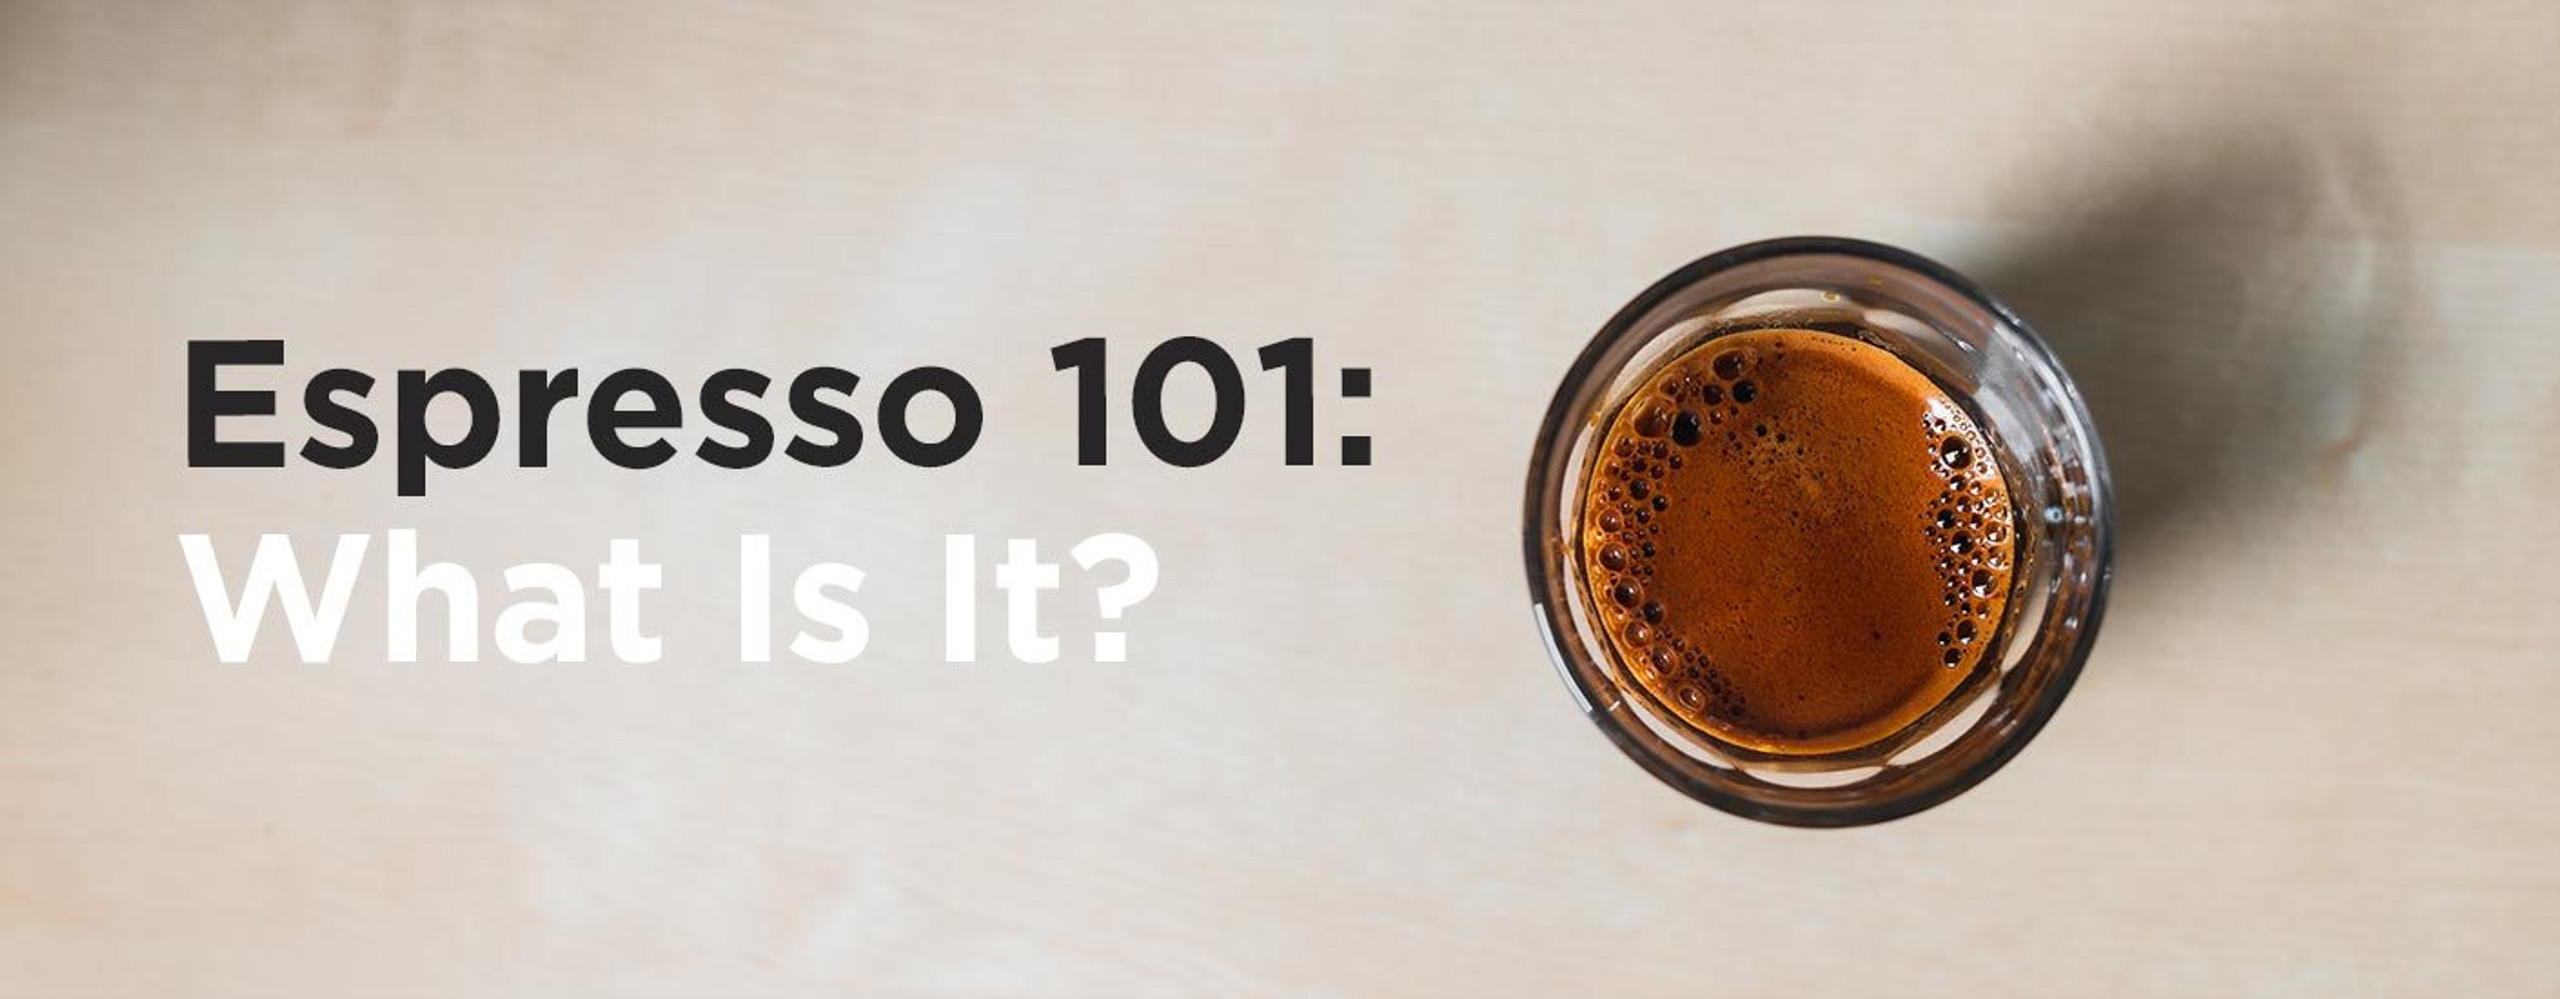 Espresso 101: What is it?